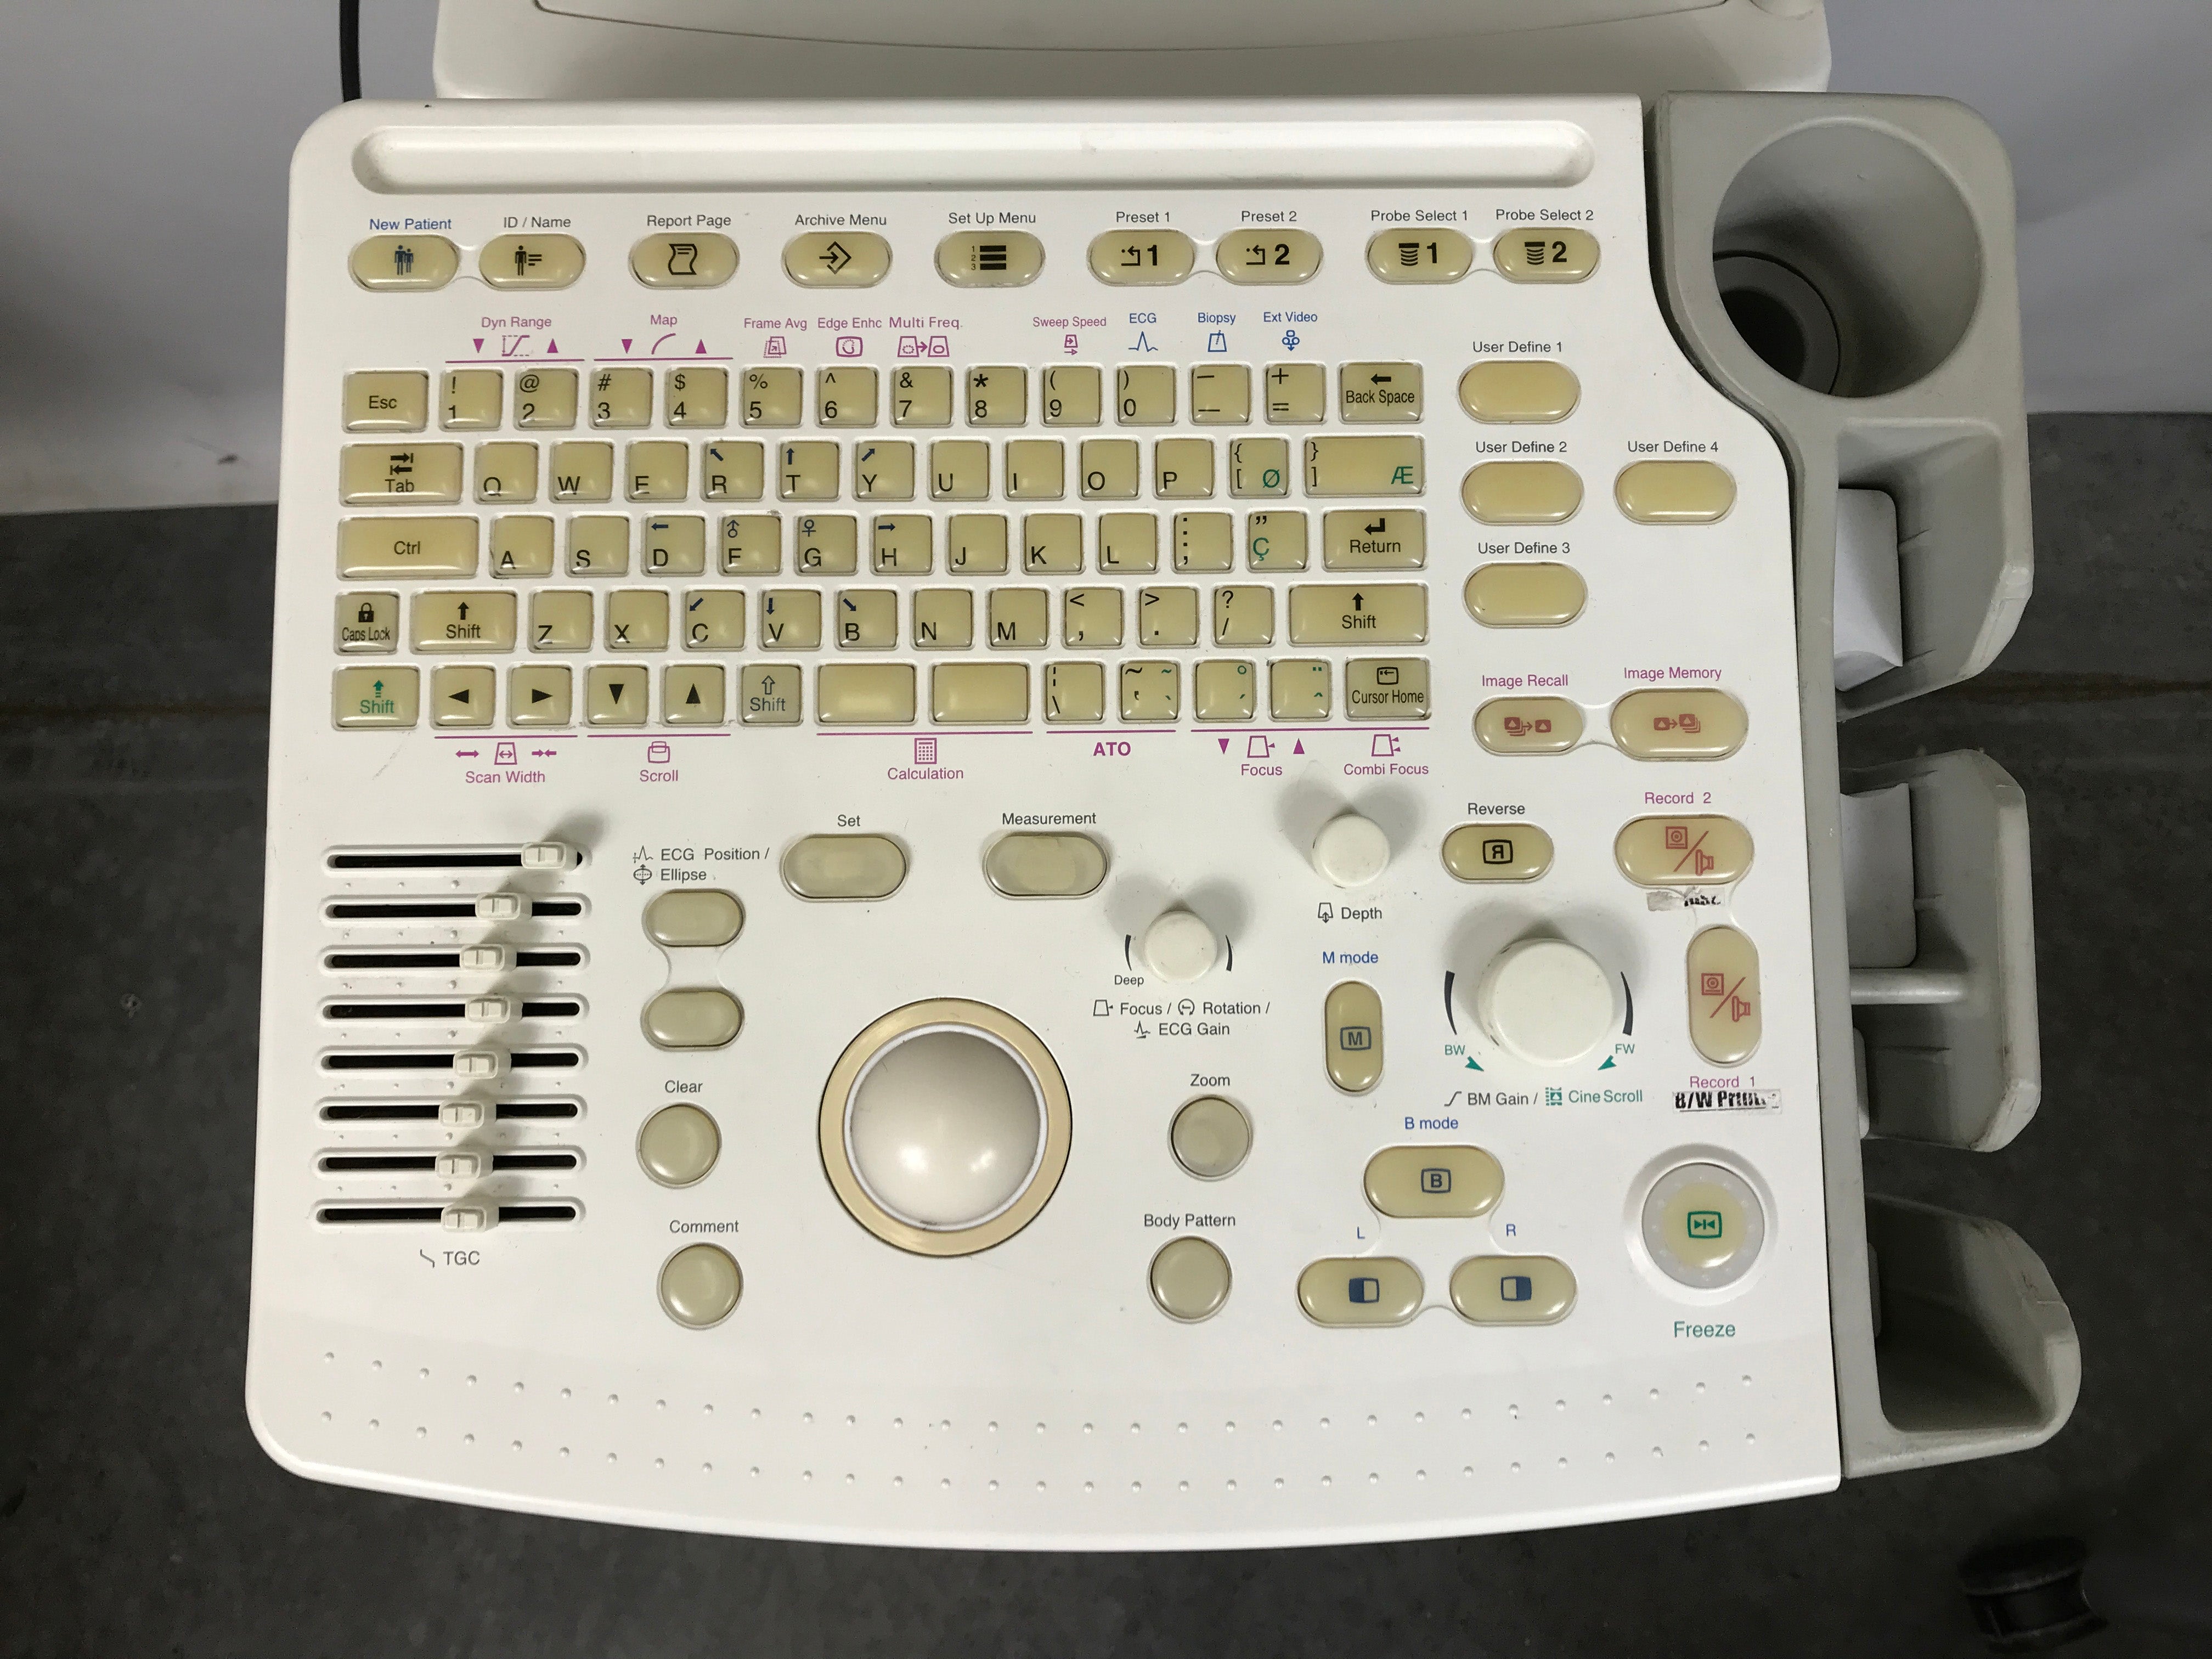 GE Logic 200 Pro Series Ultrasound Machine *For Parts or Repair*